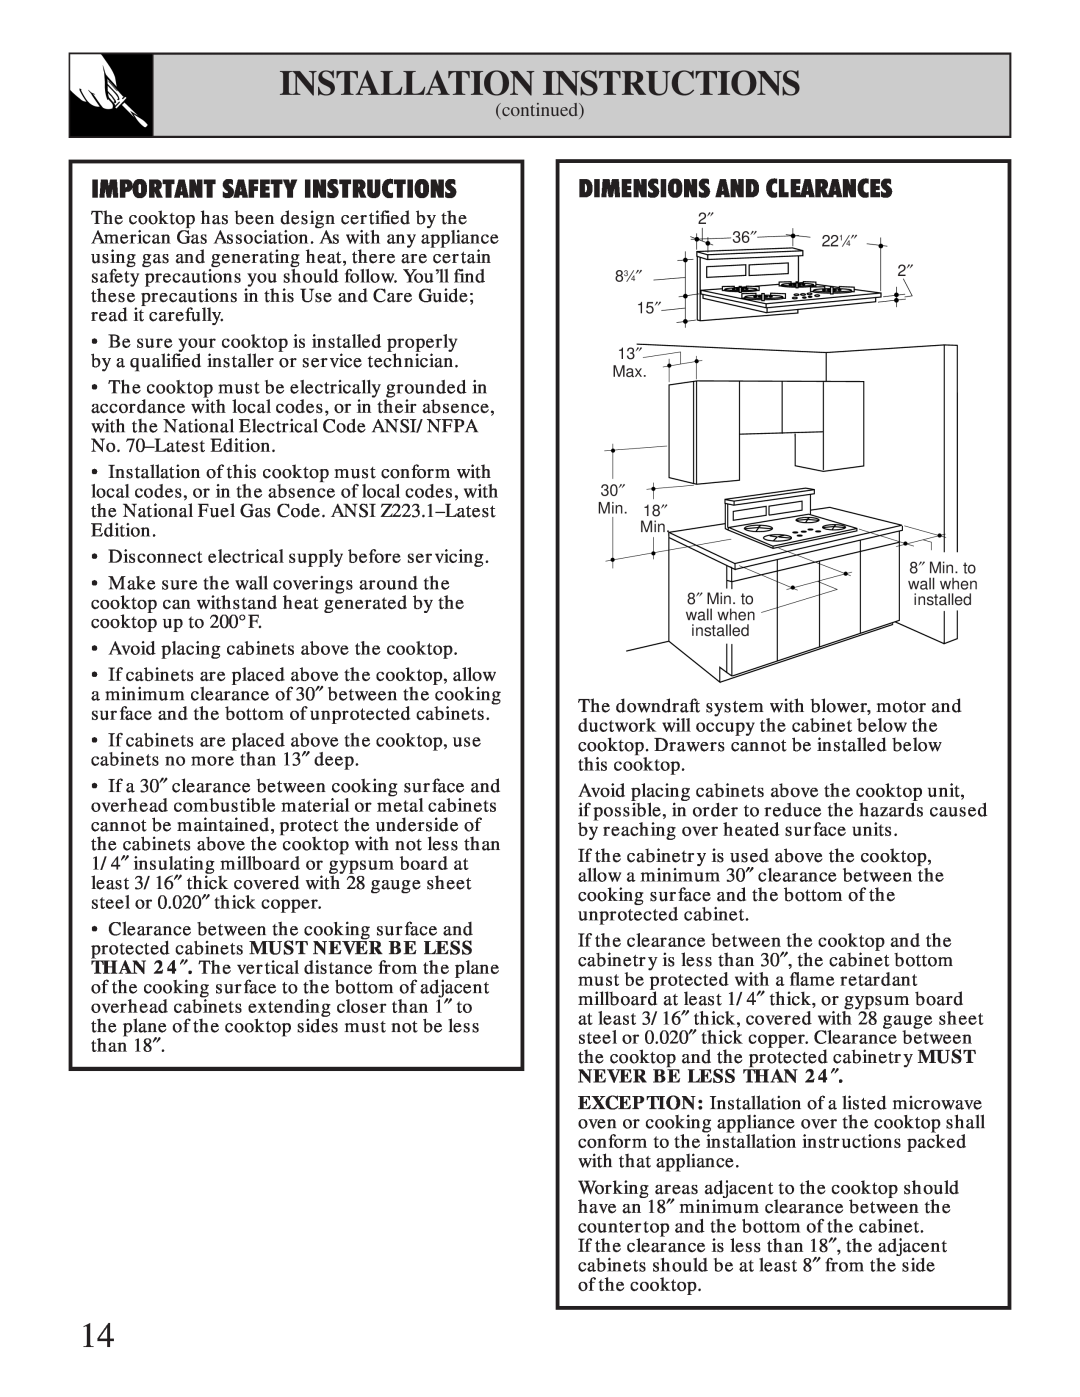 GE Monogram JGP645 Important Safety Instructions, Dimensions And Clearances, Installation Instructions 